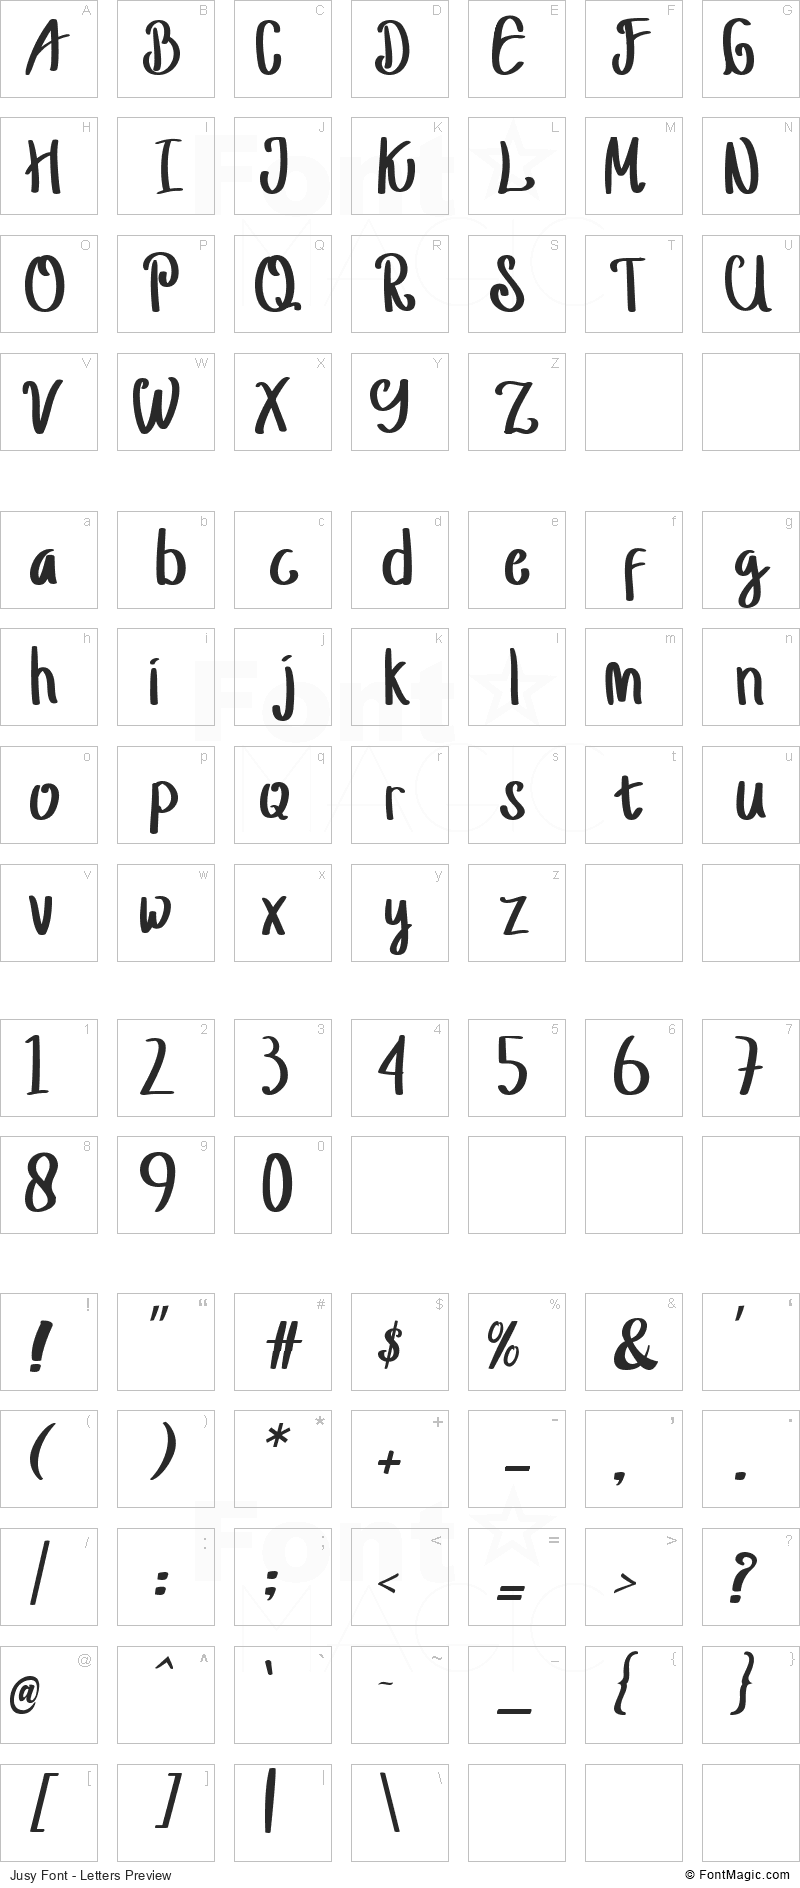 Jusy Font - All Latters Preview Chart